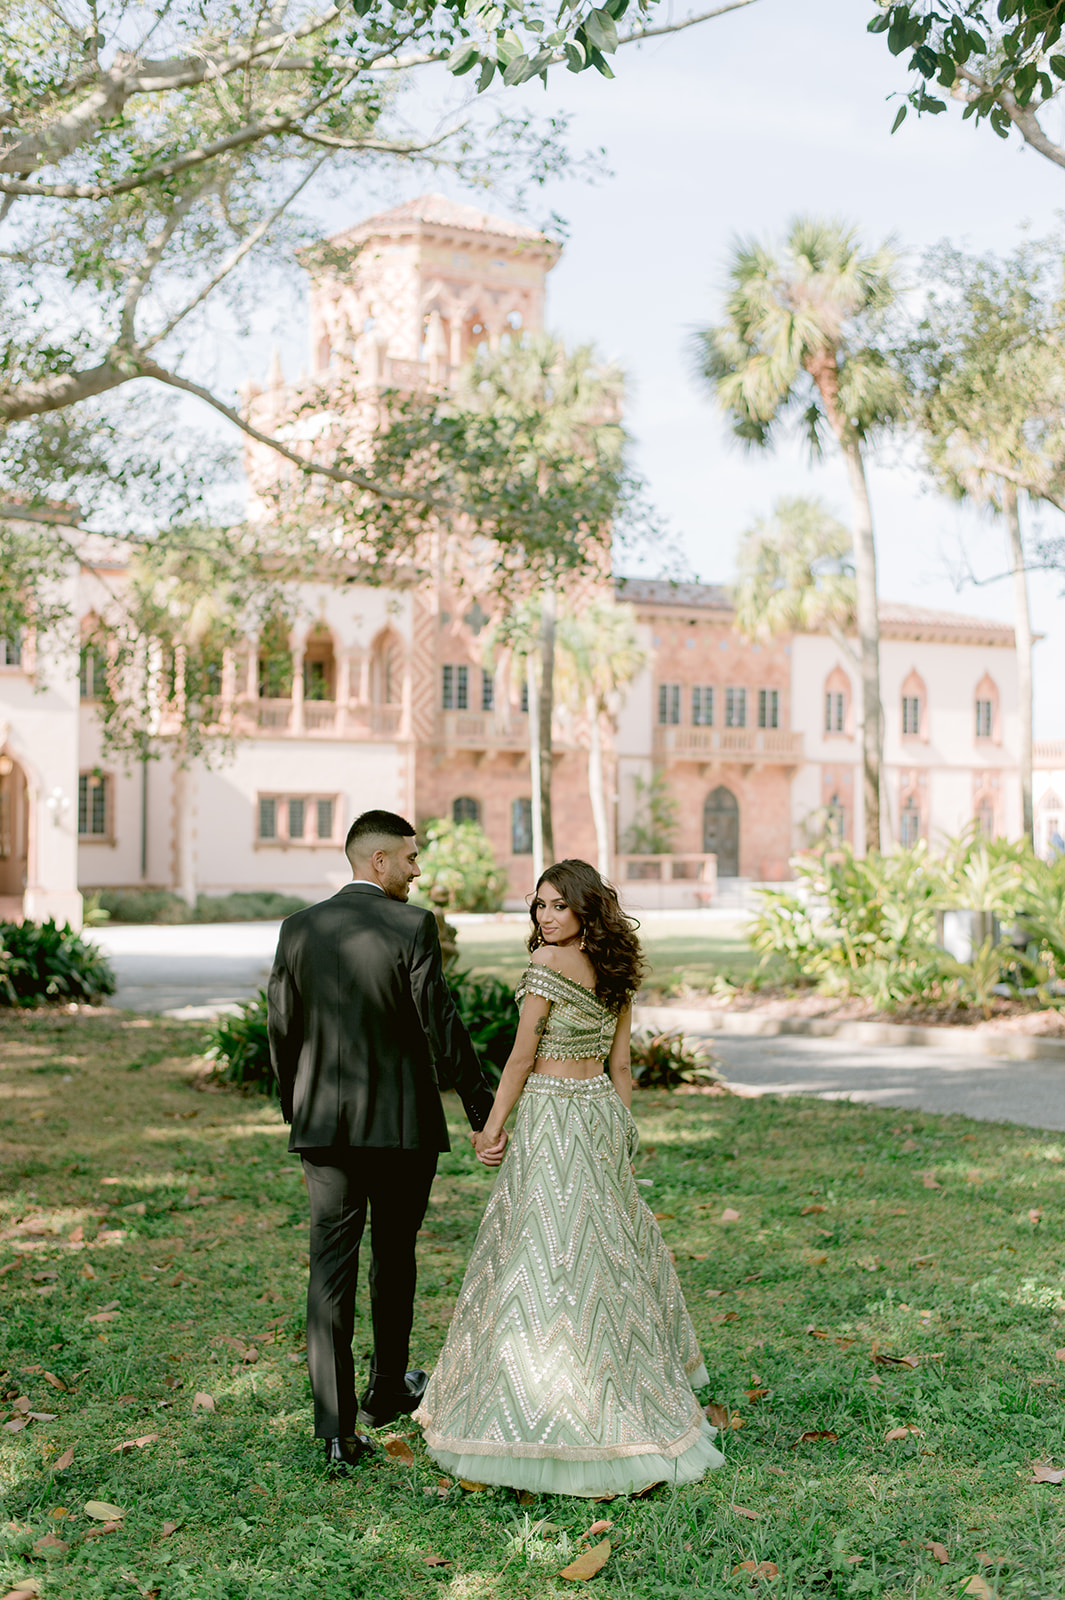 "Ringling Museum engagement shoot with Indian couple captures the essence of love and beauty"
